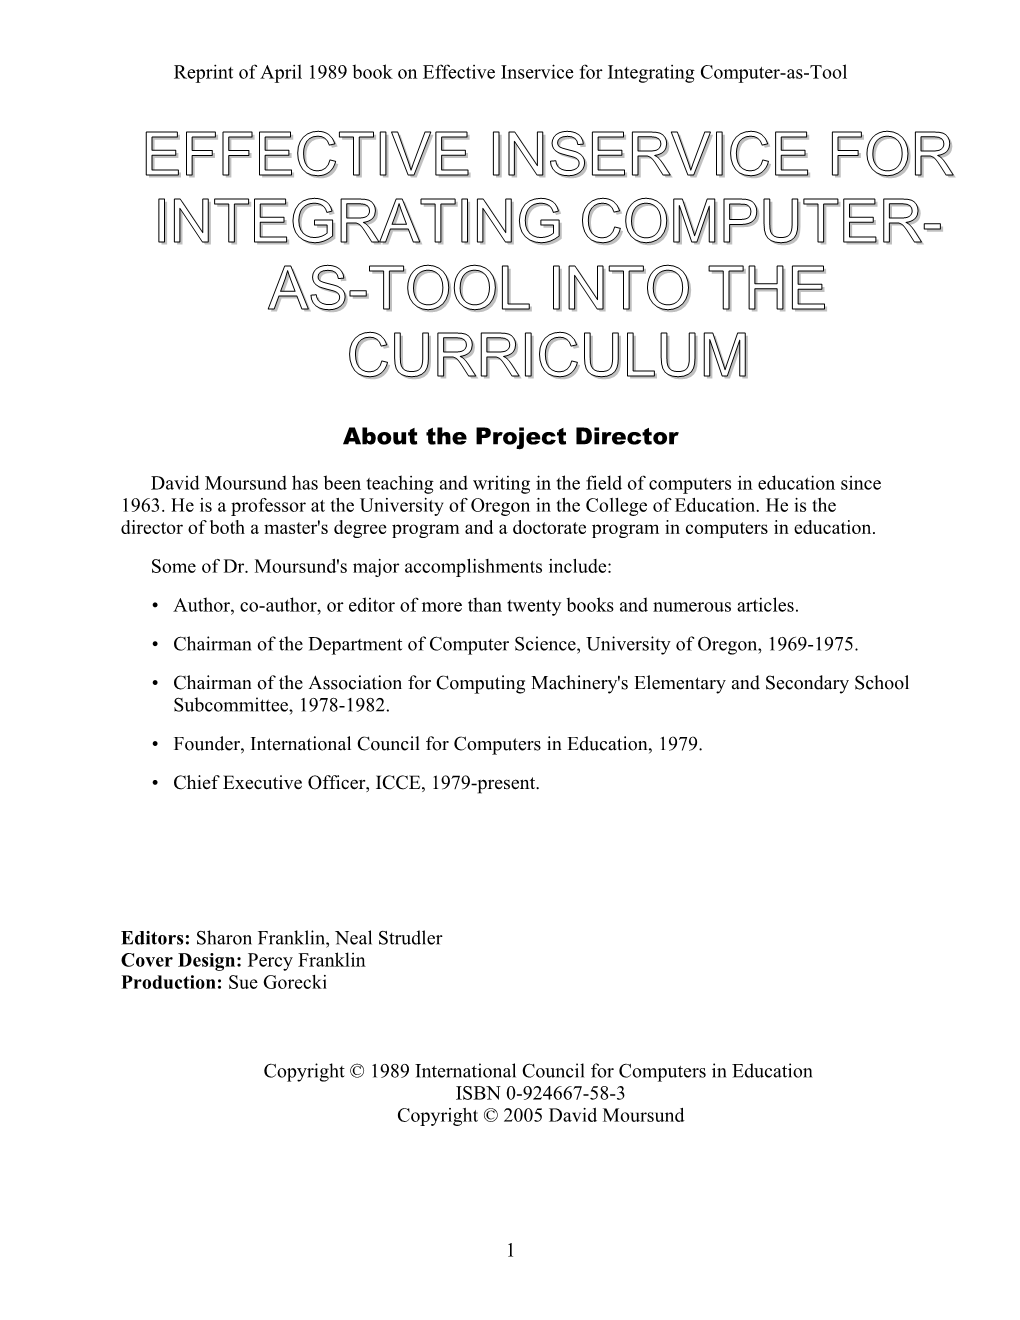 Effective Inservice for Integrating Computer-As-Tool Into the Curriculum